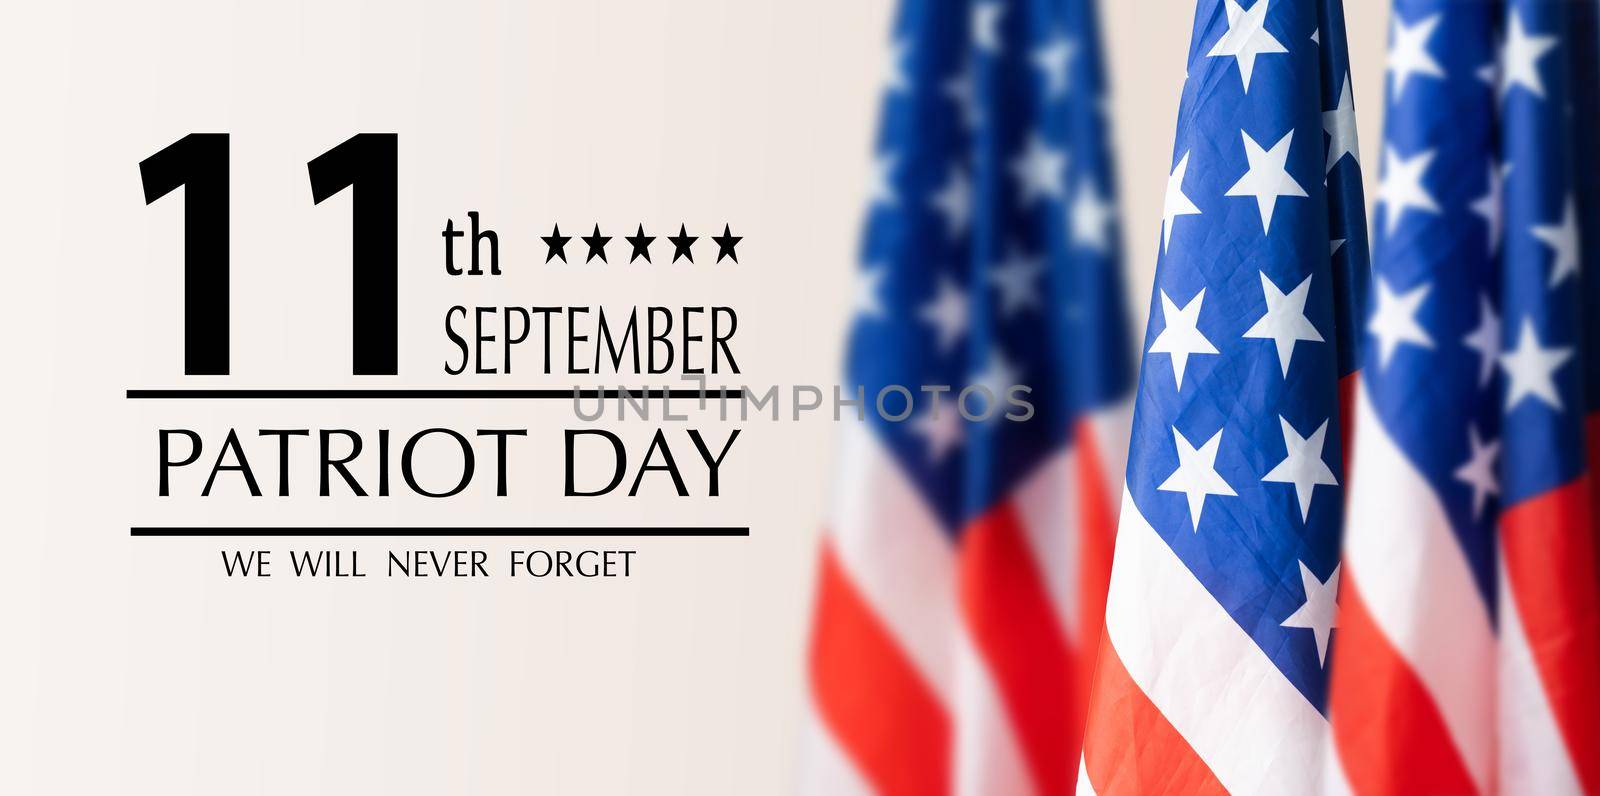 USA Patriot Day illustration. patriotic template for greeting card, flyer, poster, banner. American flag, candle, holiday message, lights. We will never forget the Victims of 9.11 Terrorist Attacks. High quality photo